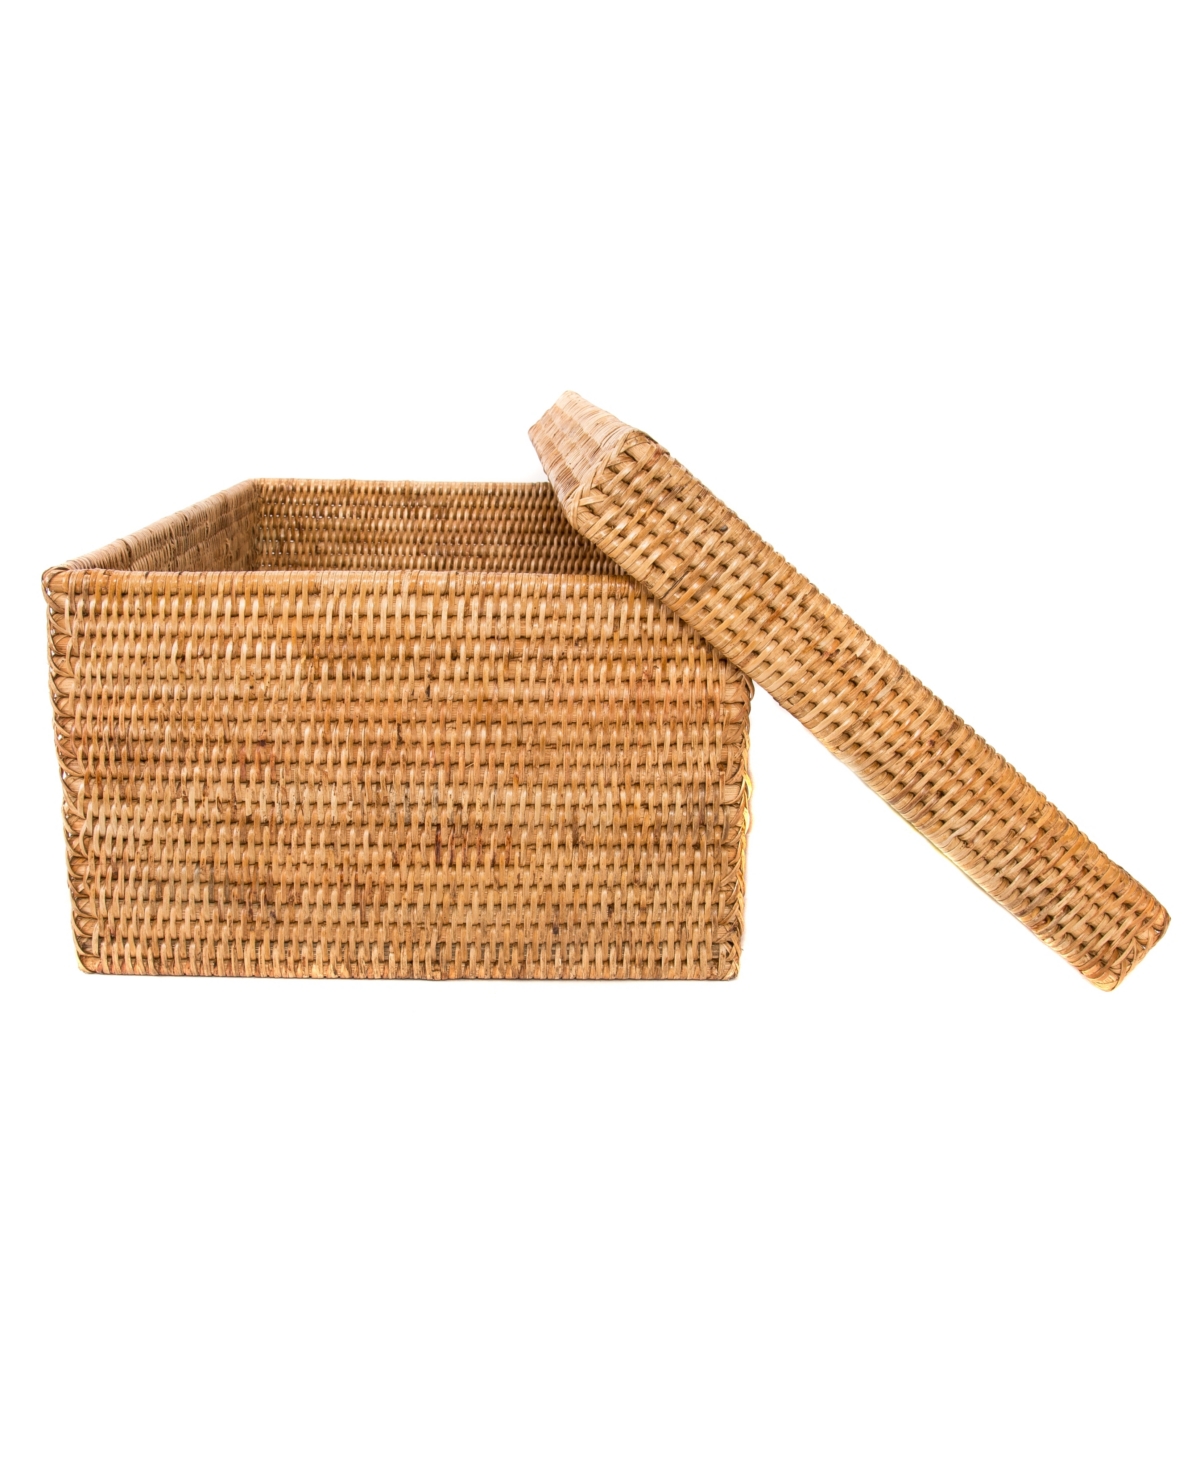 Artifacts Trading Company Artifacts Rattan Rectangular Storage Box With Lid In Honey Brown